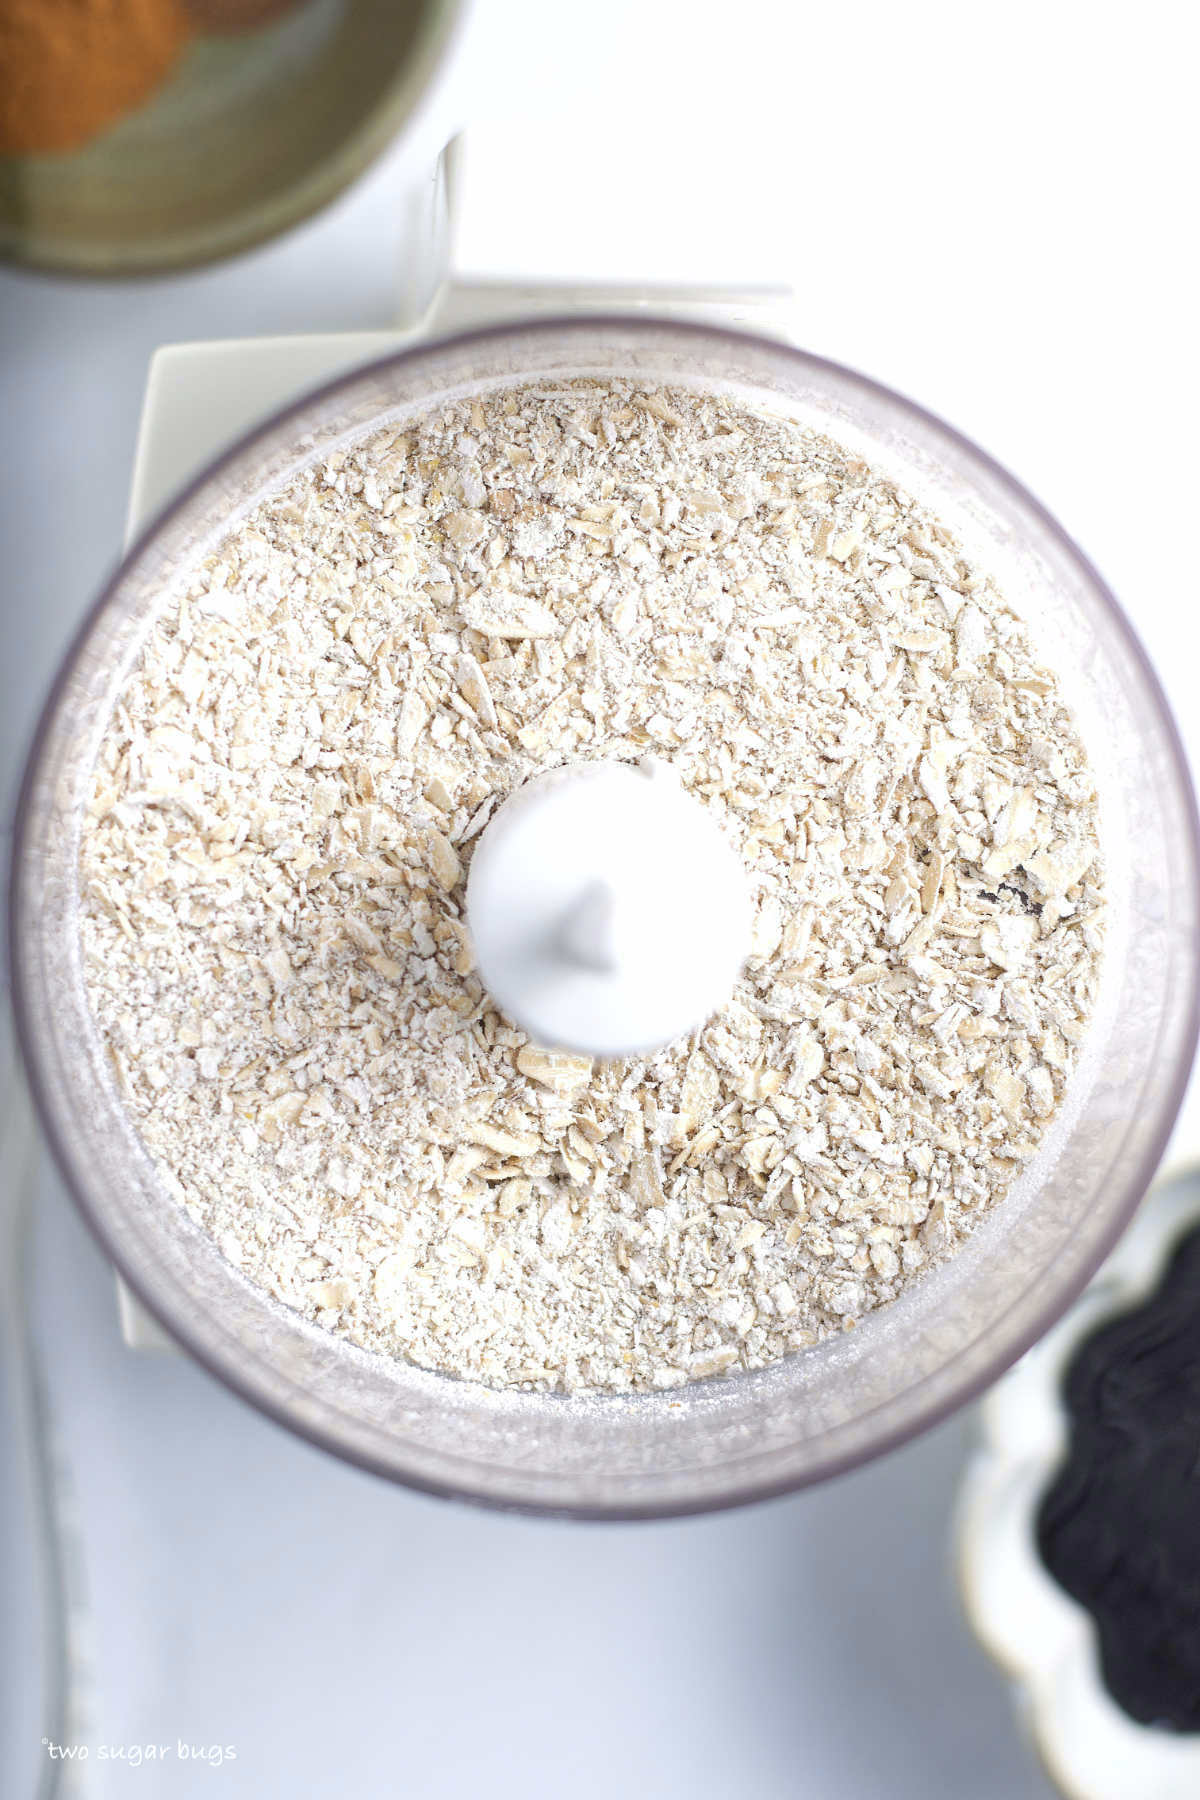 pulsed oats in a food processor